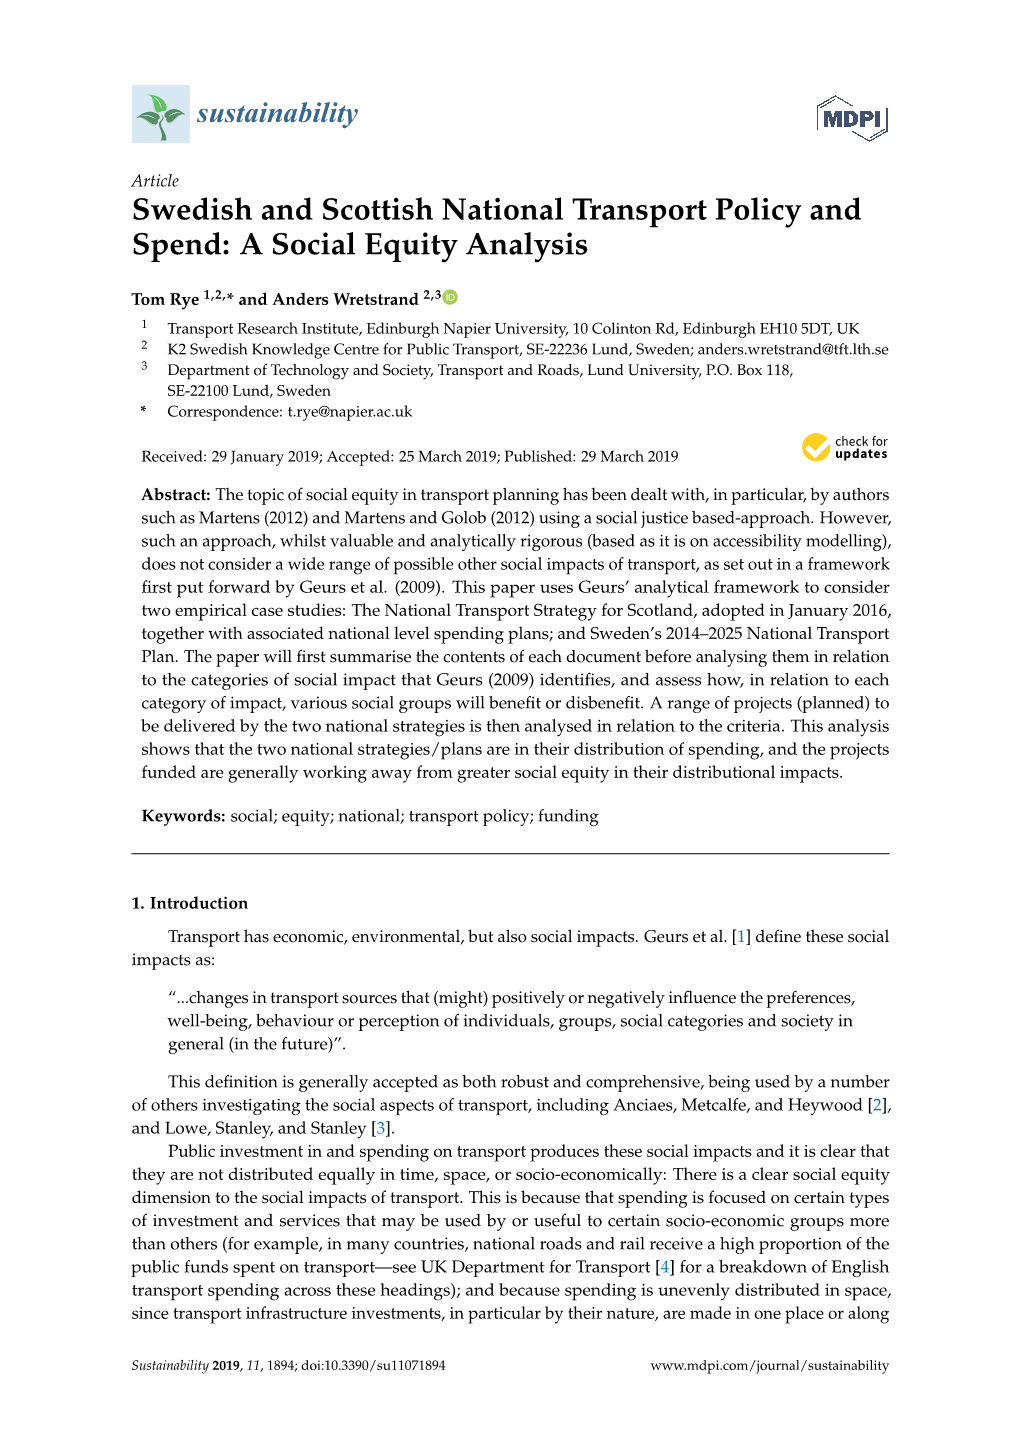 Swedish and Scottish National Transport Policy and Spend: a Social Equity Analysis